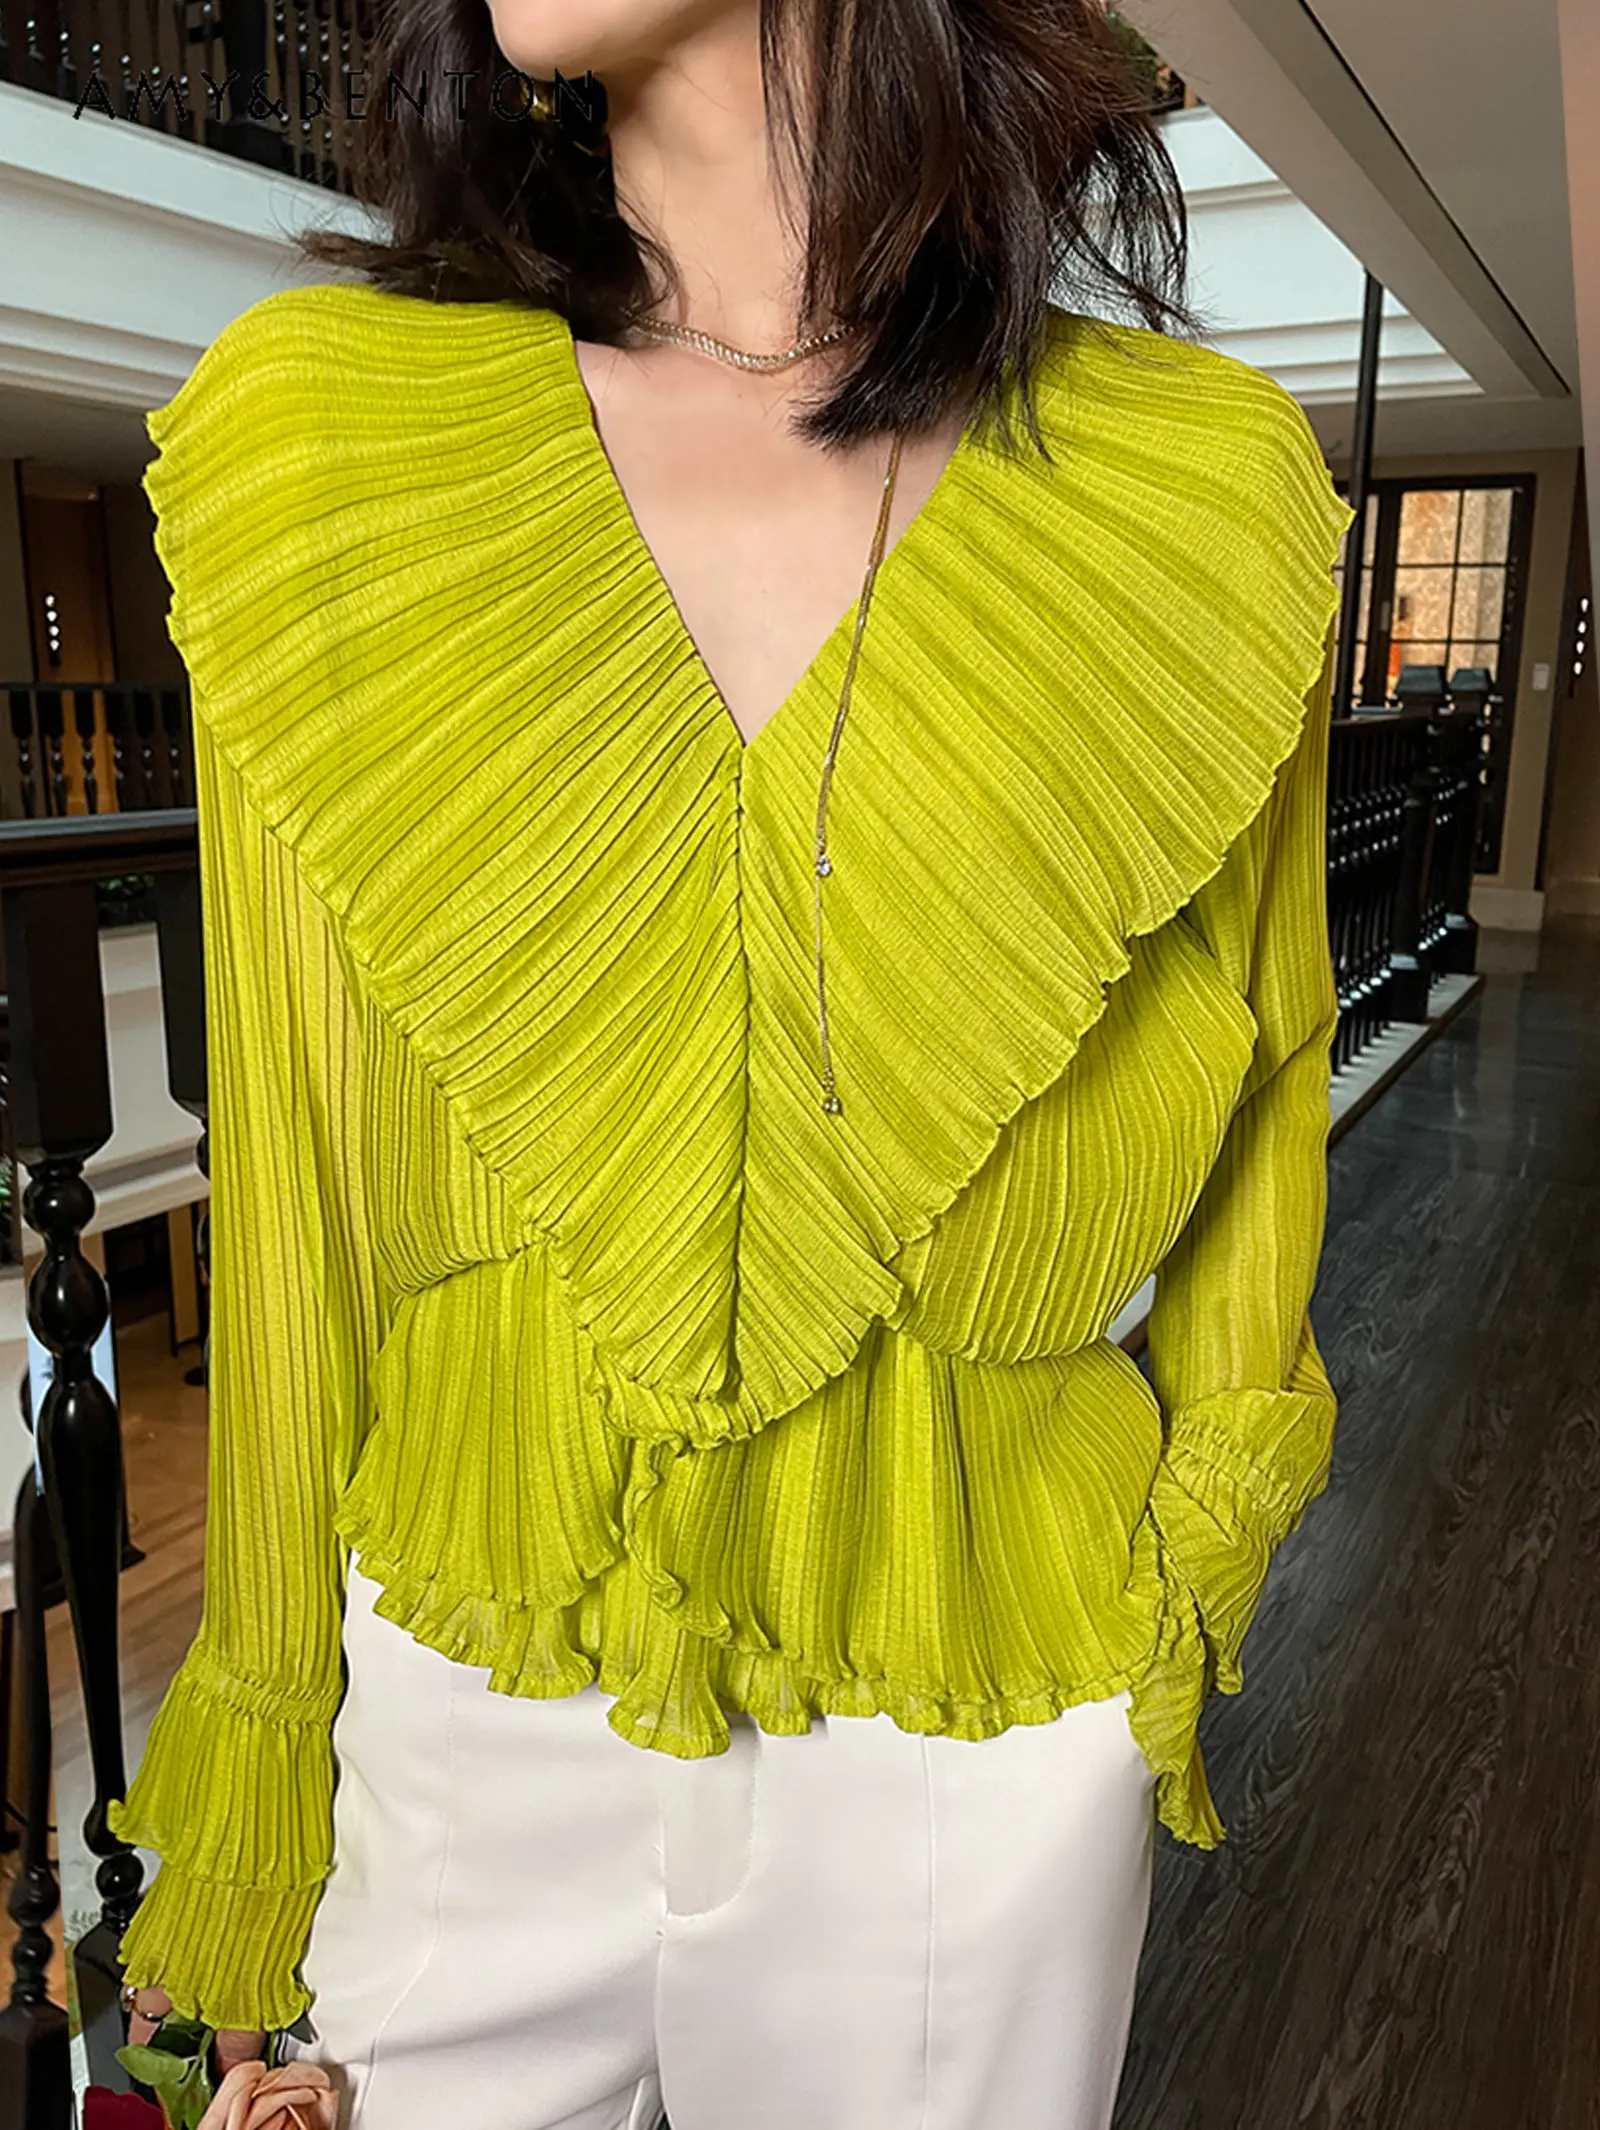 French Ruffled Elegant Pleated V-neck Blouse Tight Waist Temperament Wild Thin Short Spring and Summer Shirt Top for Women Thin